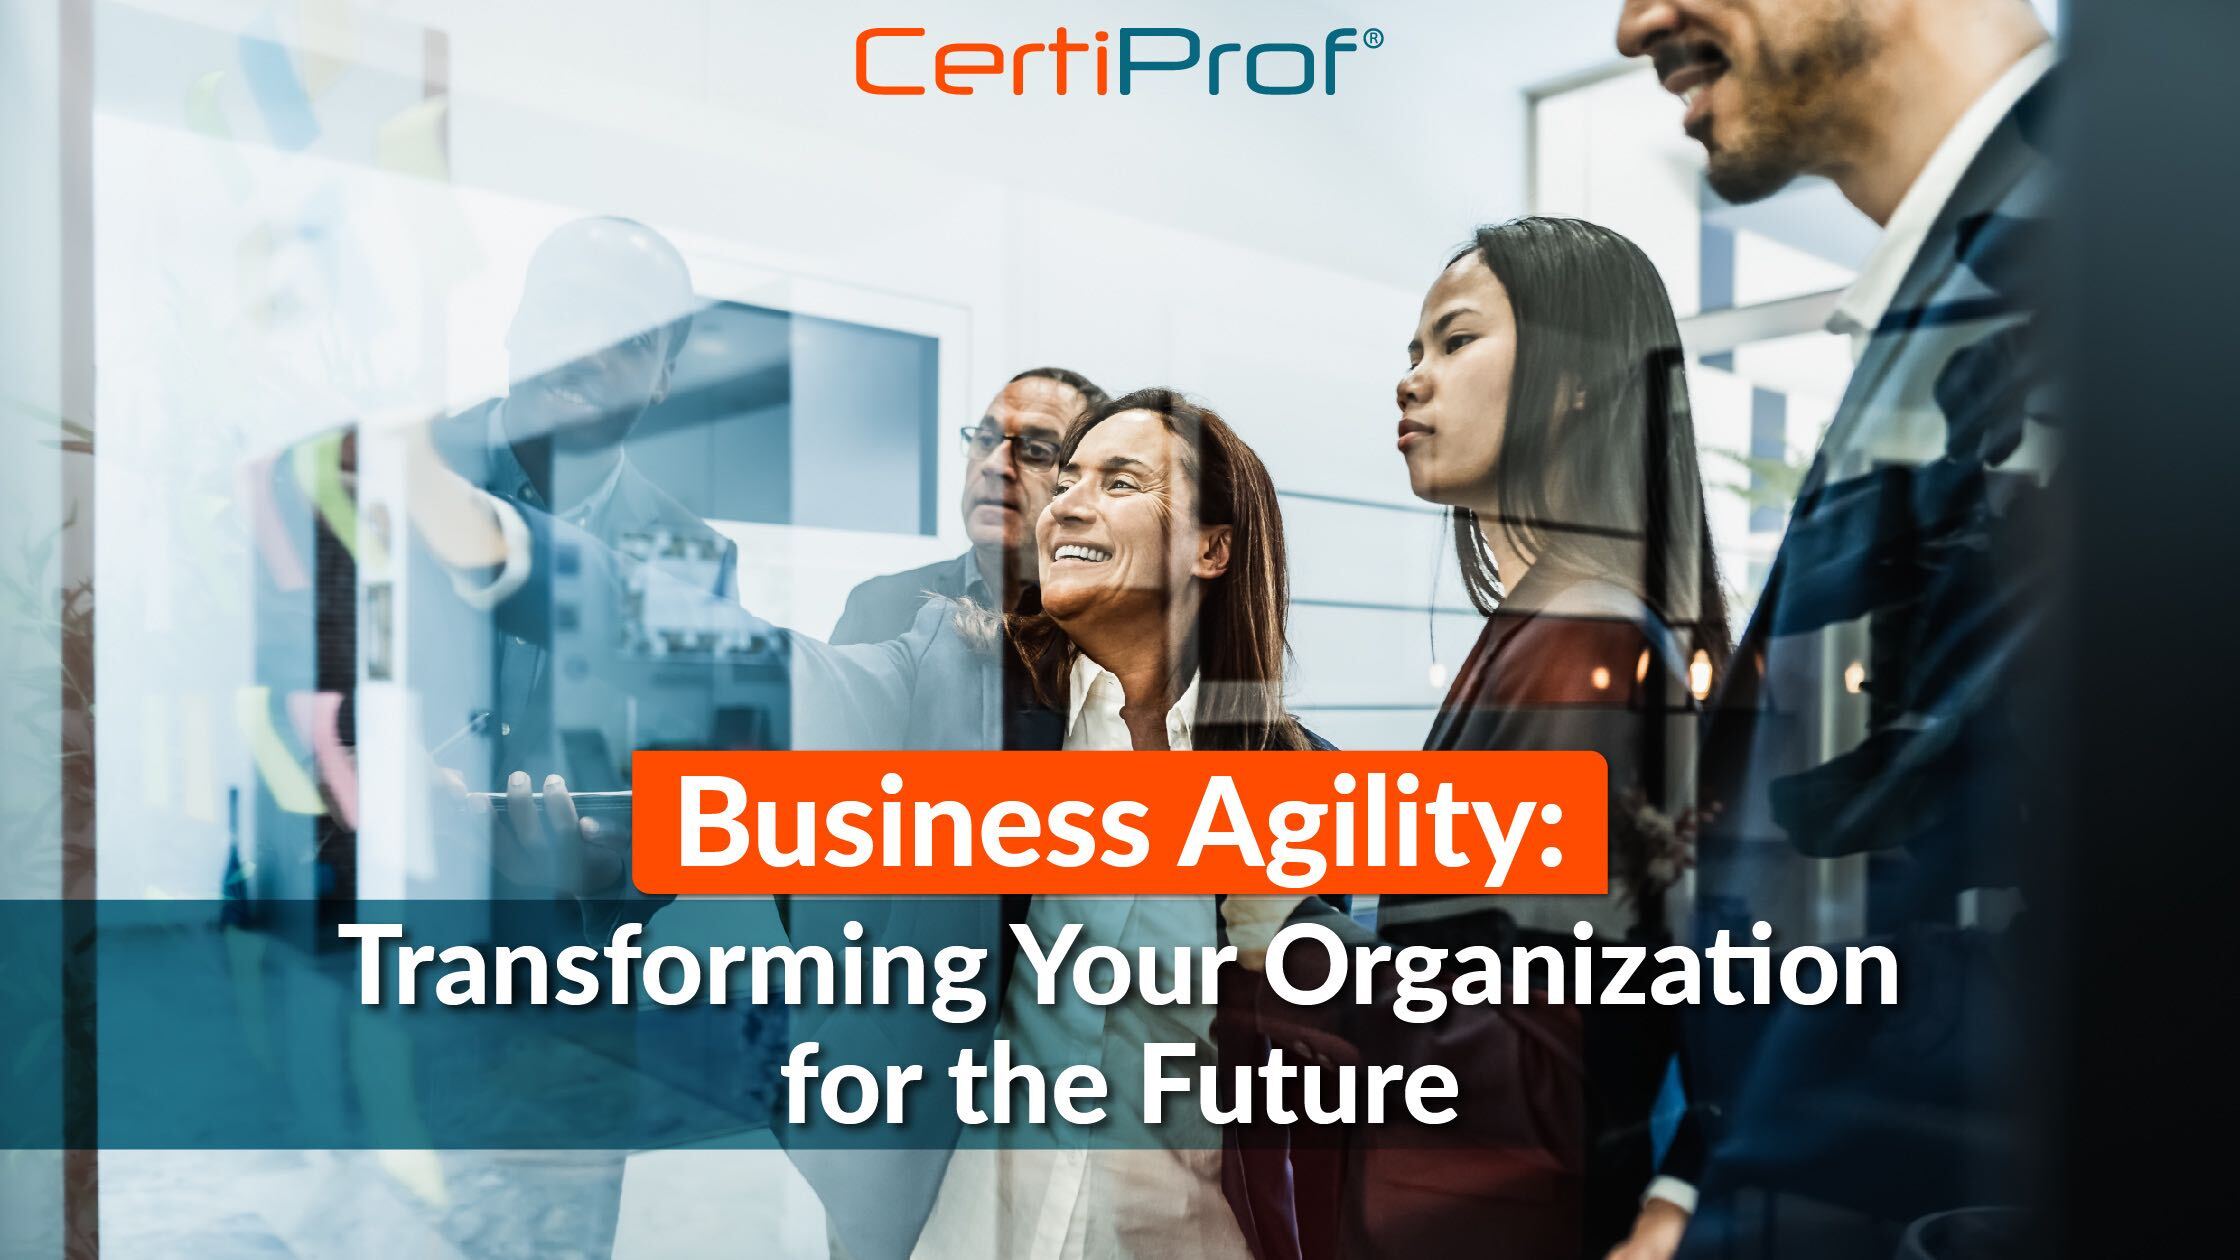 Business Agility: Transforming Your Organization for the Future